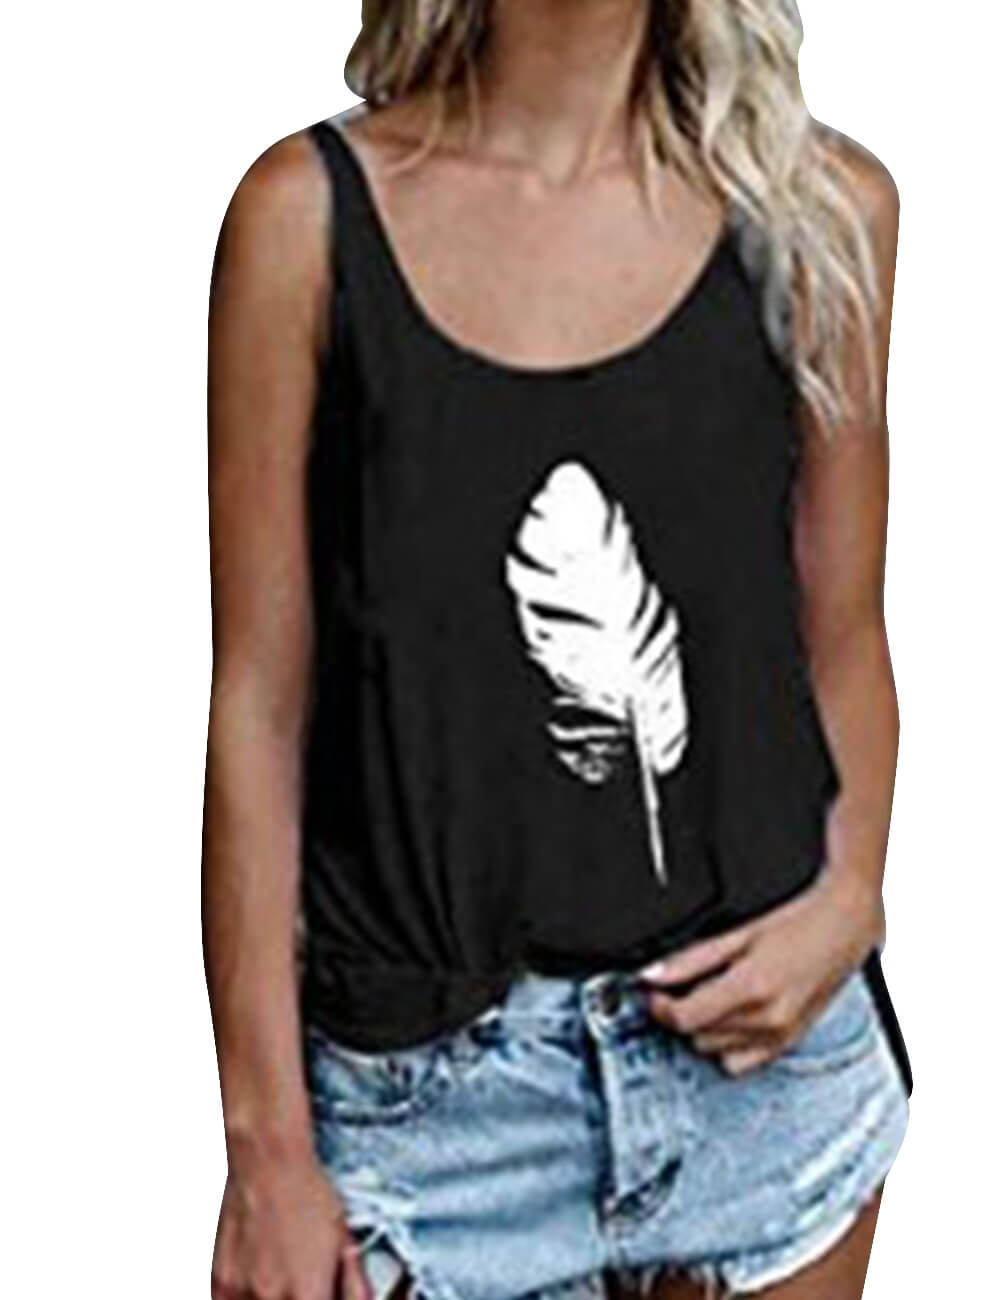  Women's Feather Print Muscle Tee Boatneck Sleeveless Shirts Long Summer Vest Loose Tank Top Tshirt